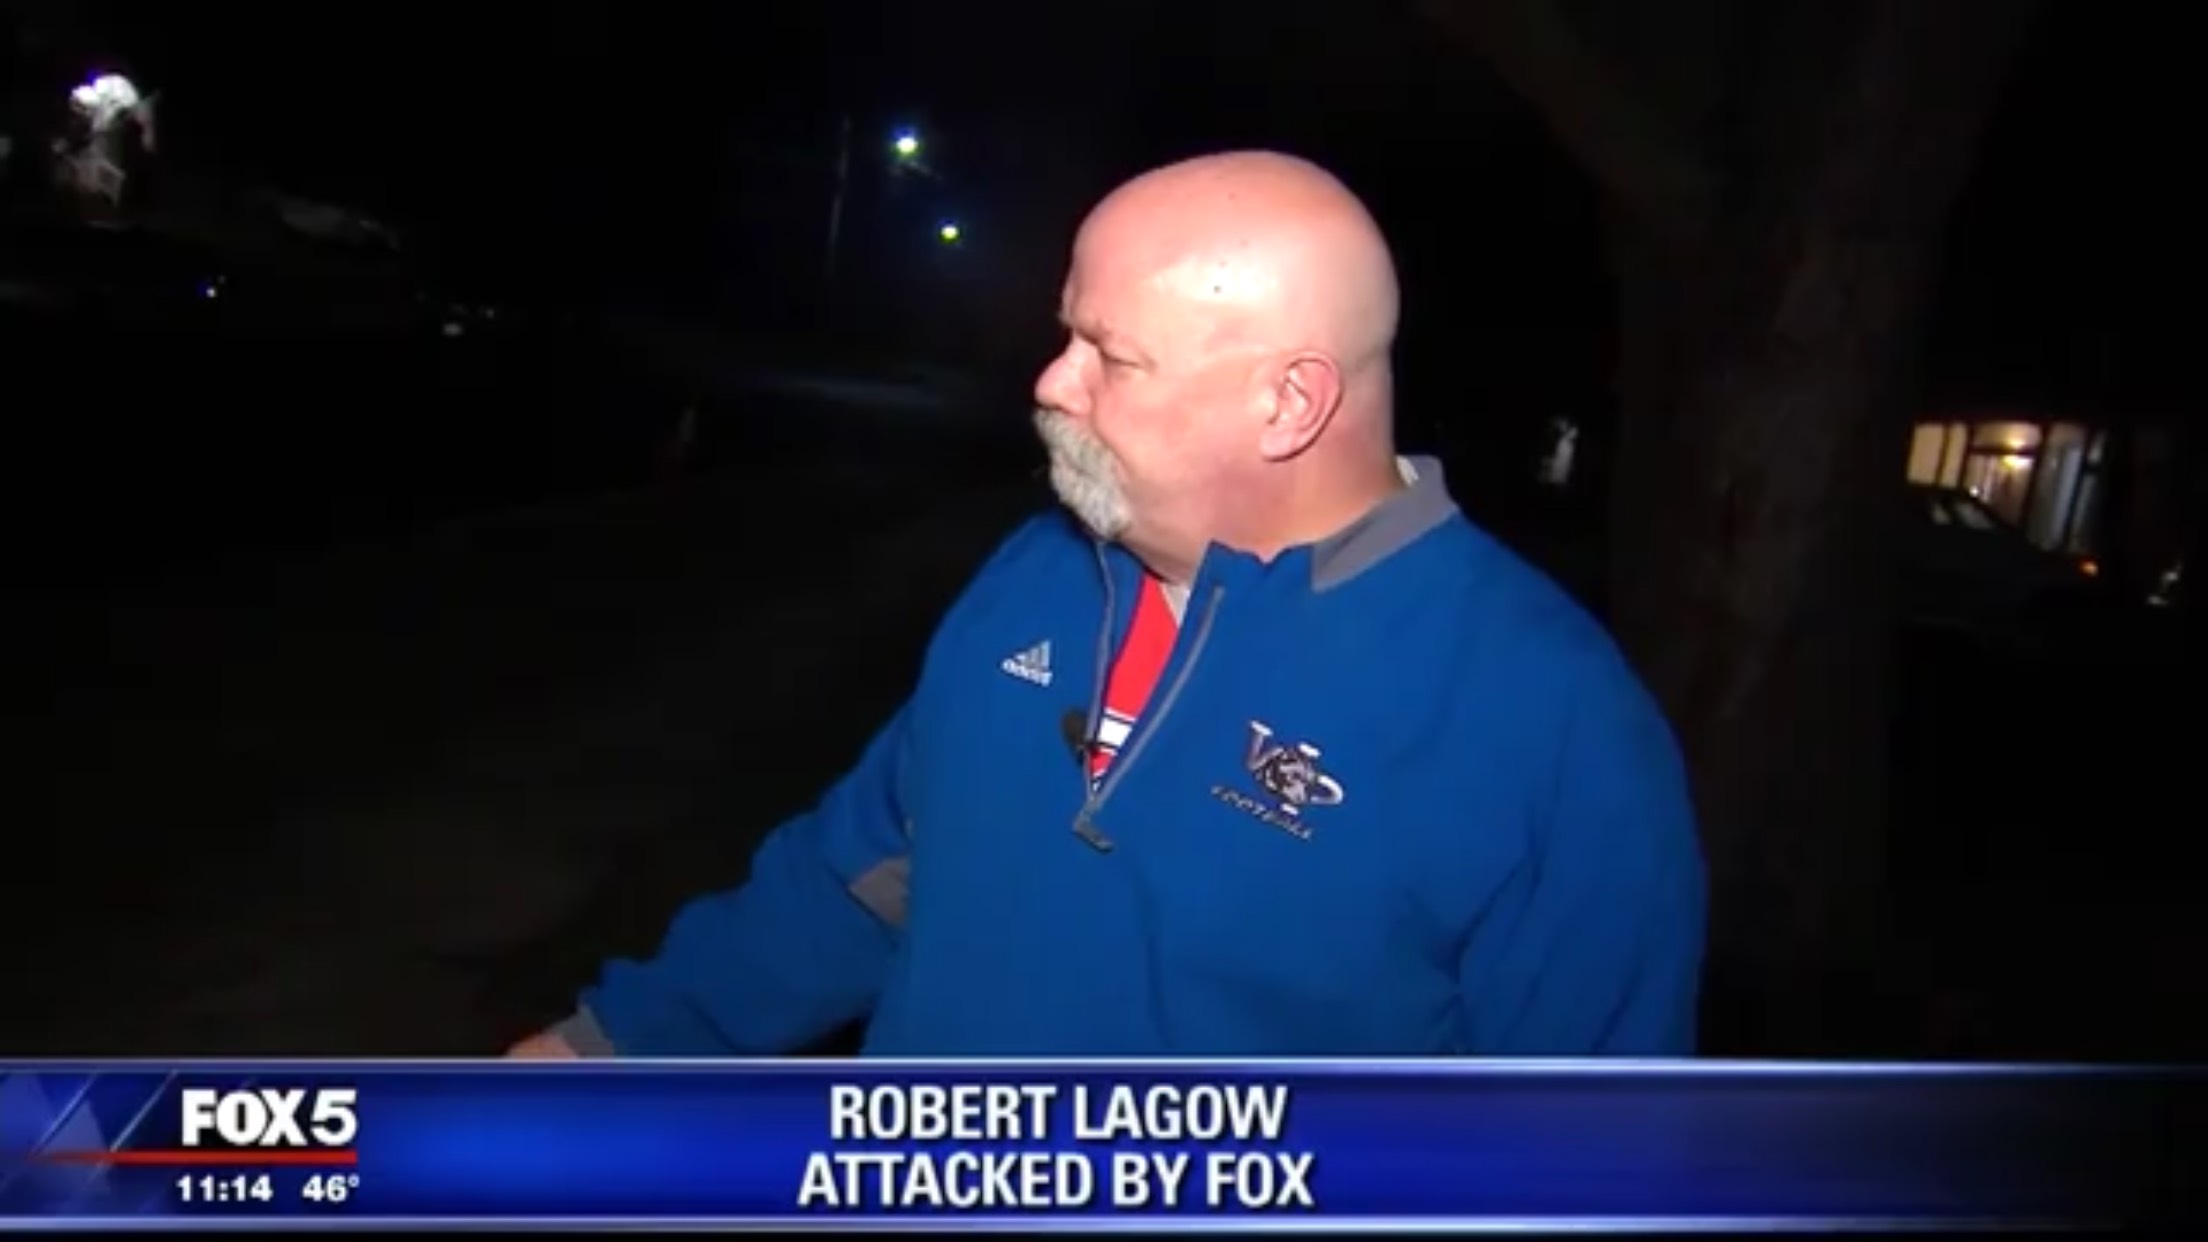 Robert Lagow: Attacked By Fox